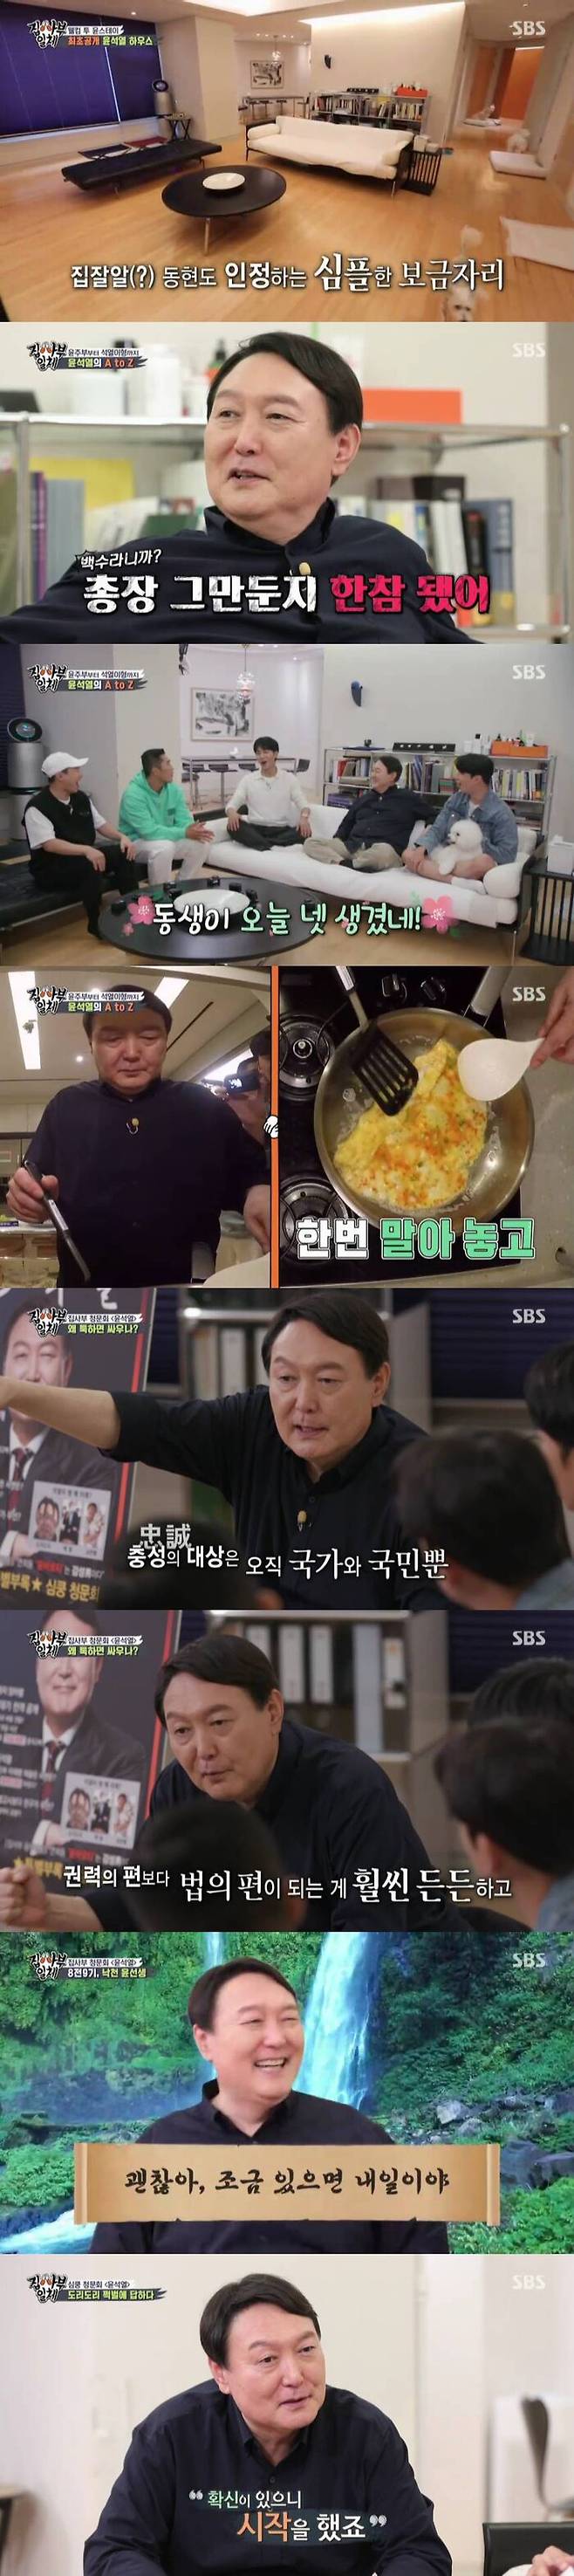 SBS All The Butlers, which was featured in the presidential election, proved the topic by breaking the double digits of the best TV viewer ratings per minute.According to Nielsen Korea, a TV viewer rating company, SBS All The Butlers TV viewer ratings in the metropolitan area, which was broadcast on the 19th, rose 3.9% p to 7.8%.Top-line and competitive indicators, 2049 target TV viewer ratings, hit 2.2%, while top-rated TV viewer ratings per minute soared to 12.1%.The broadcast was made up of the first feature of the presidential election.The news that three of the most supportive presidential candidates who declared their candidacy for the 20th presidential election was known to appear, and the first runner on the day, former prosecutor general Yoon Seok-ryul appeared.On this day, Yoon Seok-ryul welcomed the members with comfortable clothes at his house, and his house was revealed for the first time.Yoon Seok-ryul said, I asked you to come to do something delicious. He said, I treat kimchi stew, bulgogi, egg rolls, etc. to make them skillful.I am a white man now.It has been a long time since I quit Prosector General of South Korea. Or Actor Ju Hyuns vocalization was also friendly and friendly.On the day, Yoon Seok-ryul asked about the resignation of Prosecutor General of South Korea and the presidential candidacy, saying, It is difficult to decide to run.It is not normal, he said, after a long time of trouble after his retirement, he decided to run for the presidential election.My generation was able to buy an Apartment if I went to the company for about 10 years, but it was too difficult to get a house for the fortress, said Yoon Seok-ryul. If a young person does not have hope, the society is dead.I have to make a change in such a problem. He said, I tend to be a little scared when I do new things.I have a lot of shortcomings, but I am confident that I can push it in the direction I think without giving up. Later, All The Butlers Hearing was held to intensively explore Master Yoon Seok-ryul.First, Yoon Seok-ryul talked about his representative quote: Im not loyal to people; he tells his juniors, The prosecutor should not be loyal to people.People I say are persons of human rights, he said, the object of loyalty is only the nation and the people. I can like people, but I am not loyal.Yoon Seok-ryul said, The chicken is important to the opponent, but it is with the president.There is no reason to challenge the president, he said. It is much more solid to be on the side of the law than the side of power.If the law of the powerful is not properly handled, the people can not be told to keep the law, and society is in turmoil. It is important how much the investigation into the powerful is based on principle.It should be based on the principle unconditionally. In addition, the hearing focused on keywords related to Jangcheon, 8th and 9th, and Doridori.In the meantime, when asked if there was anything he wanted to take away from Lee Jae-myung and Lee Nak-yeon, who foreshadowed the presidential feature, Yoon Seok-ryul answered frankly, I want to resemble Lee Nak-yeon and Lee Jae-myung.Such a young seak-ryul replied, Yes to the question I am the 20th president of the Republic of Korea.I have to show you more, but I have seen you doing well so far, so you will have the belief that you will do well. Finally, Yoon Seok-ryul asked, If you become president, I will not do this. Sharing rice together is the basis of communication.I will always communicate with many people, such as opposition parties, journalists, and people who need encouragement. He said, I will not eat rice, and I will not hide in front of the people, whether I did well or wrong. Meanwhile, Lee Jae-myung, the governor of Gyeonggi Province, will appear on the 26th following former prosecutor general Yoon Seok-ryul, and Lee Nak-yeon, former Democratic Party leader, will appear on October 3.